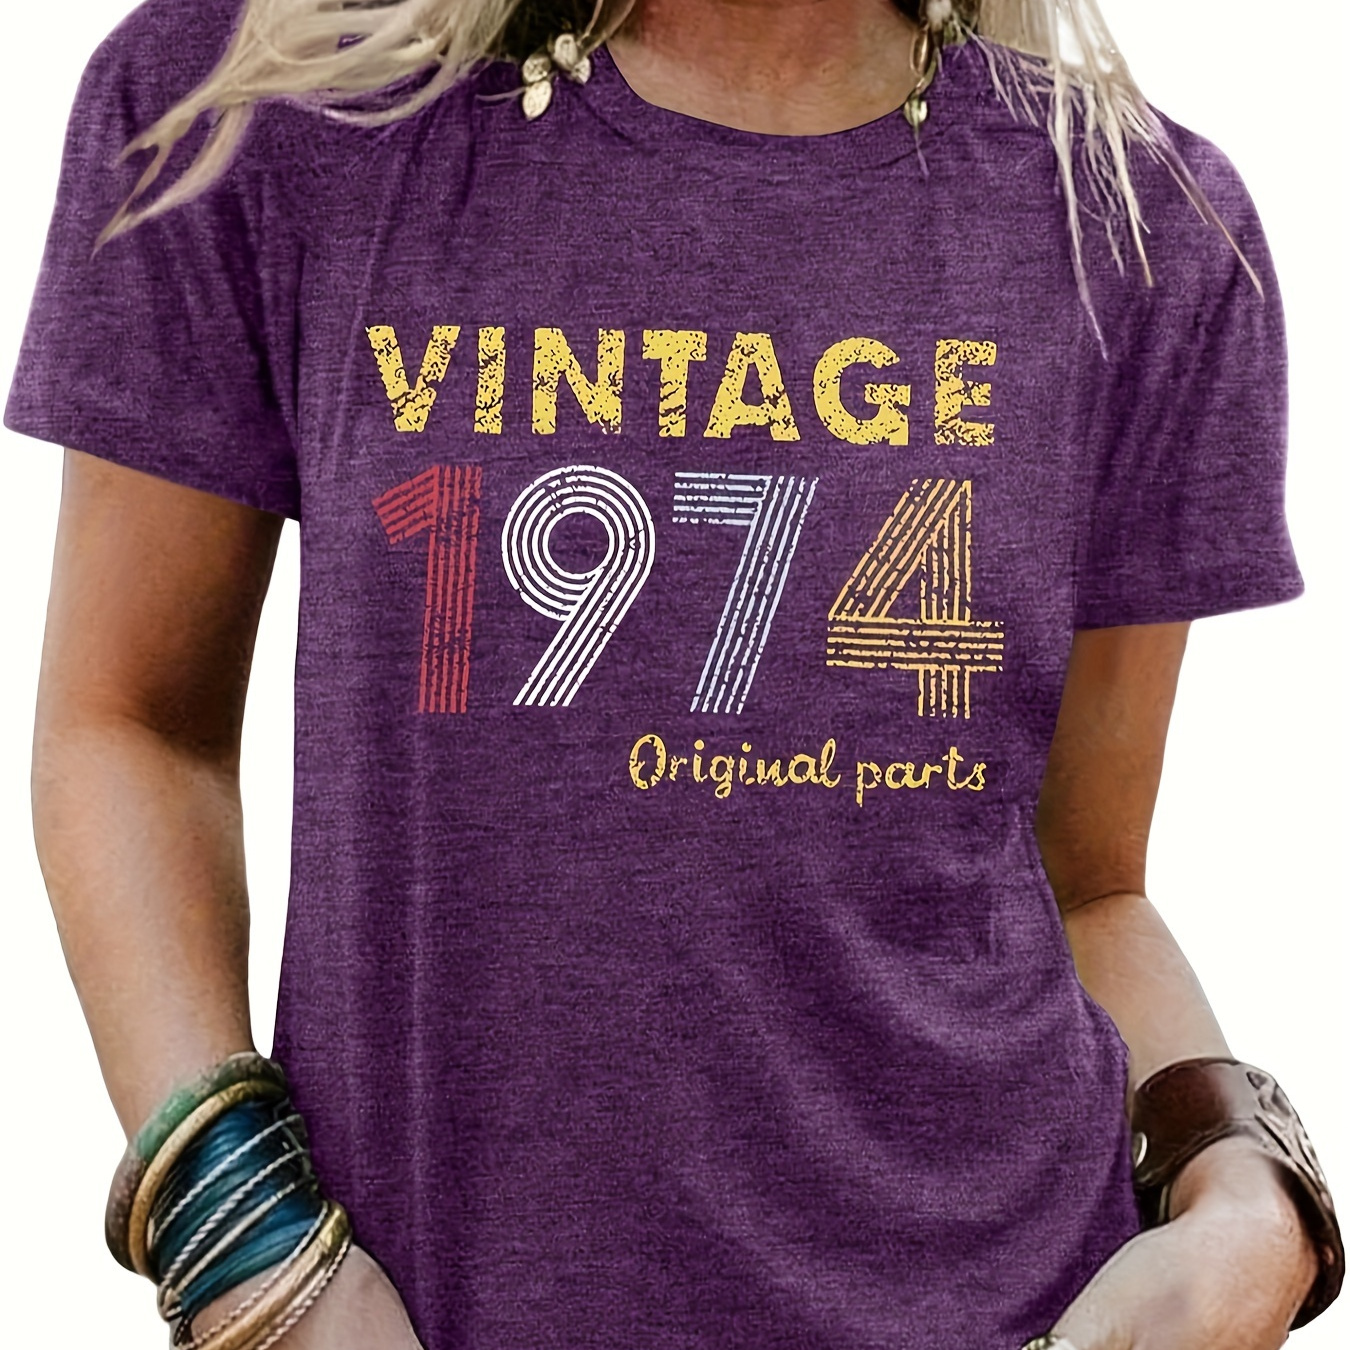 

Vintage 1974 Print Crew Neck T-shirt, Casual Short Sleeve T-shirt For Spring & Summer, Women's Clothing